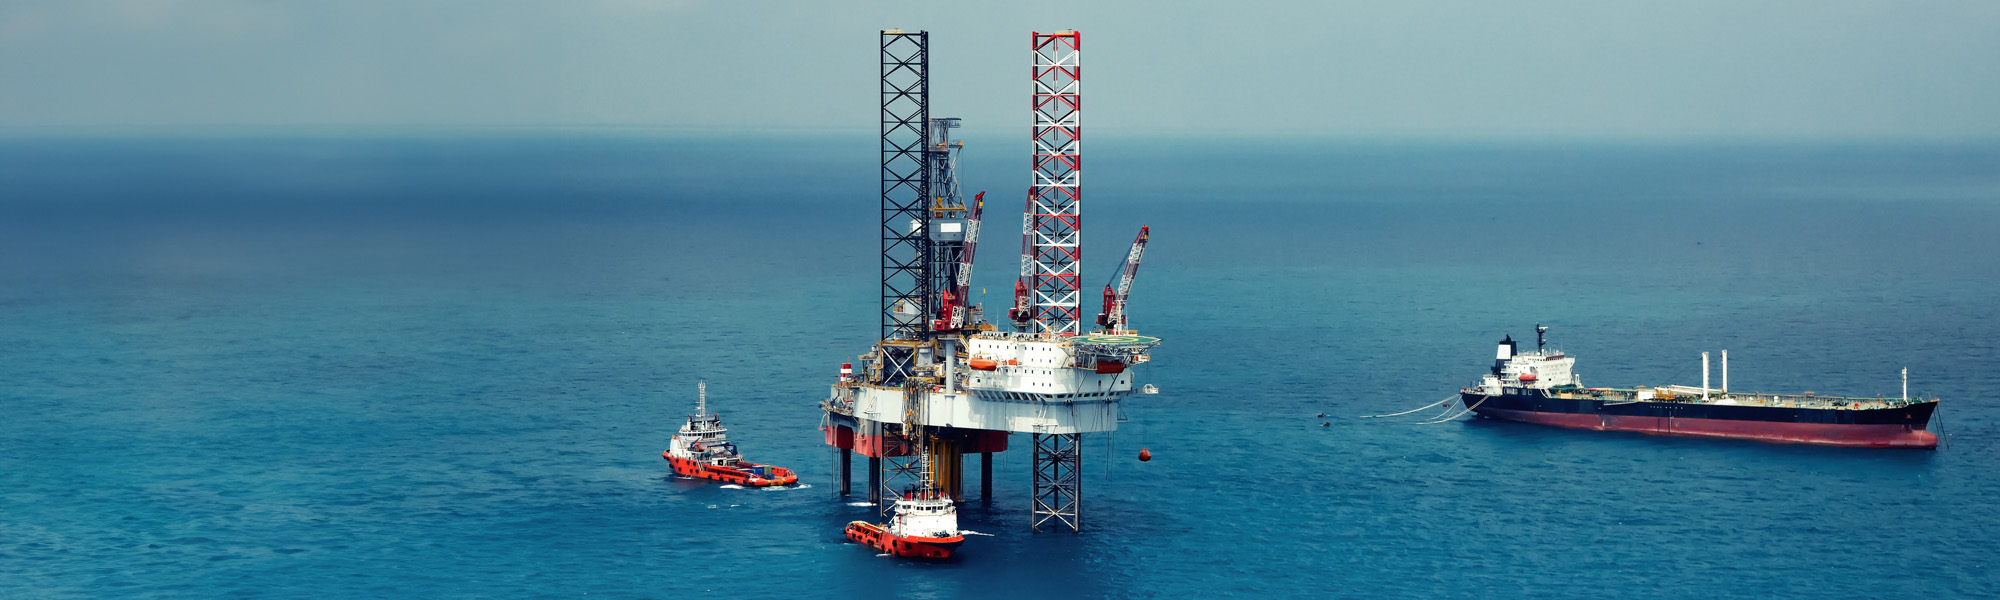 offshore oil rig drilling platform in the gulf